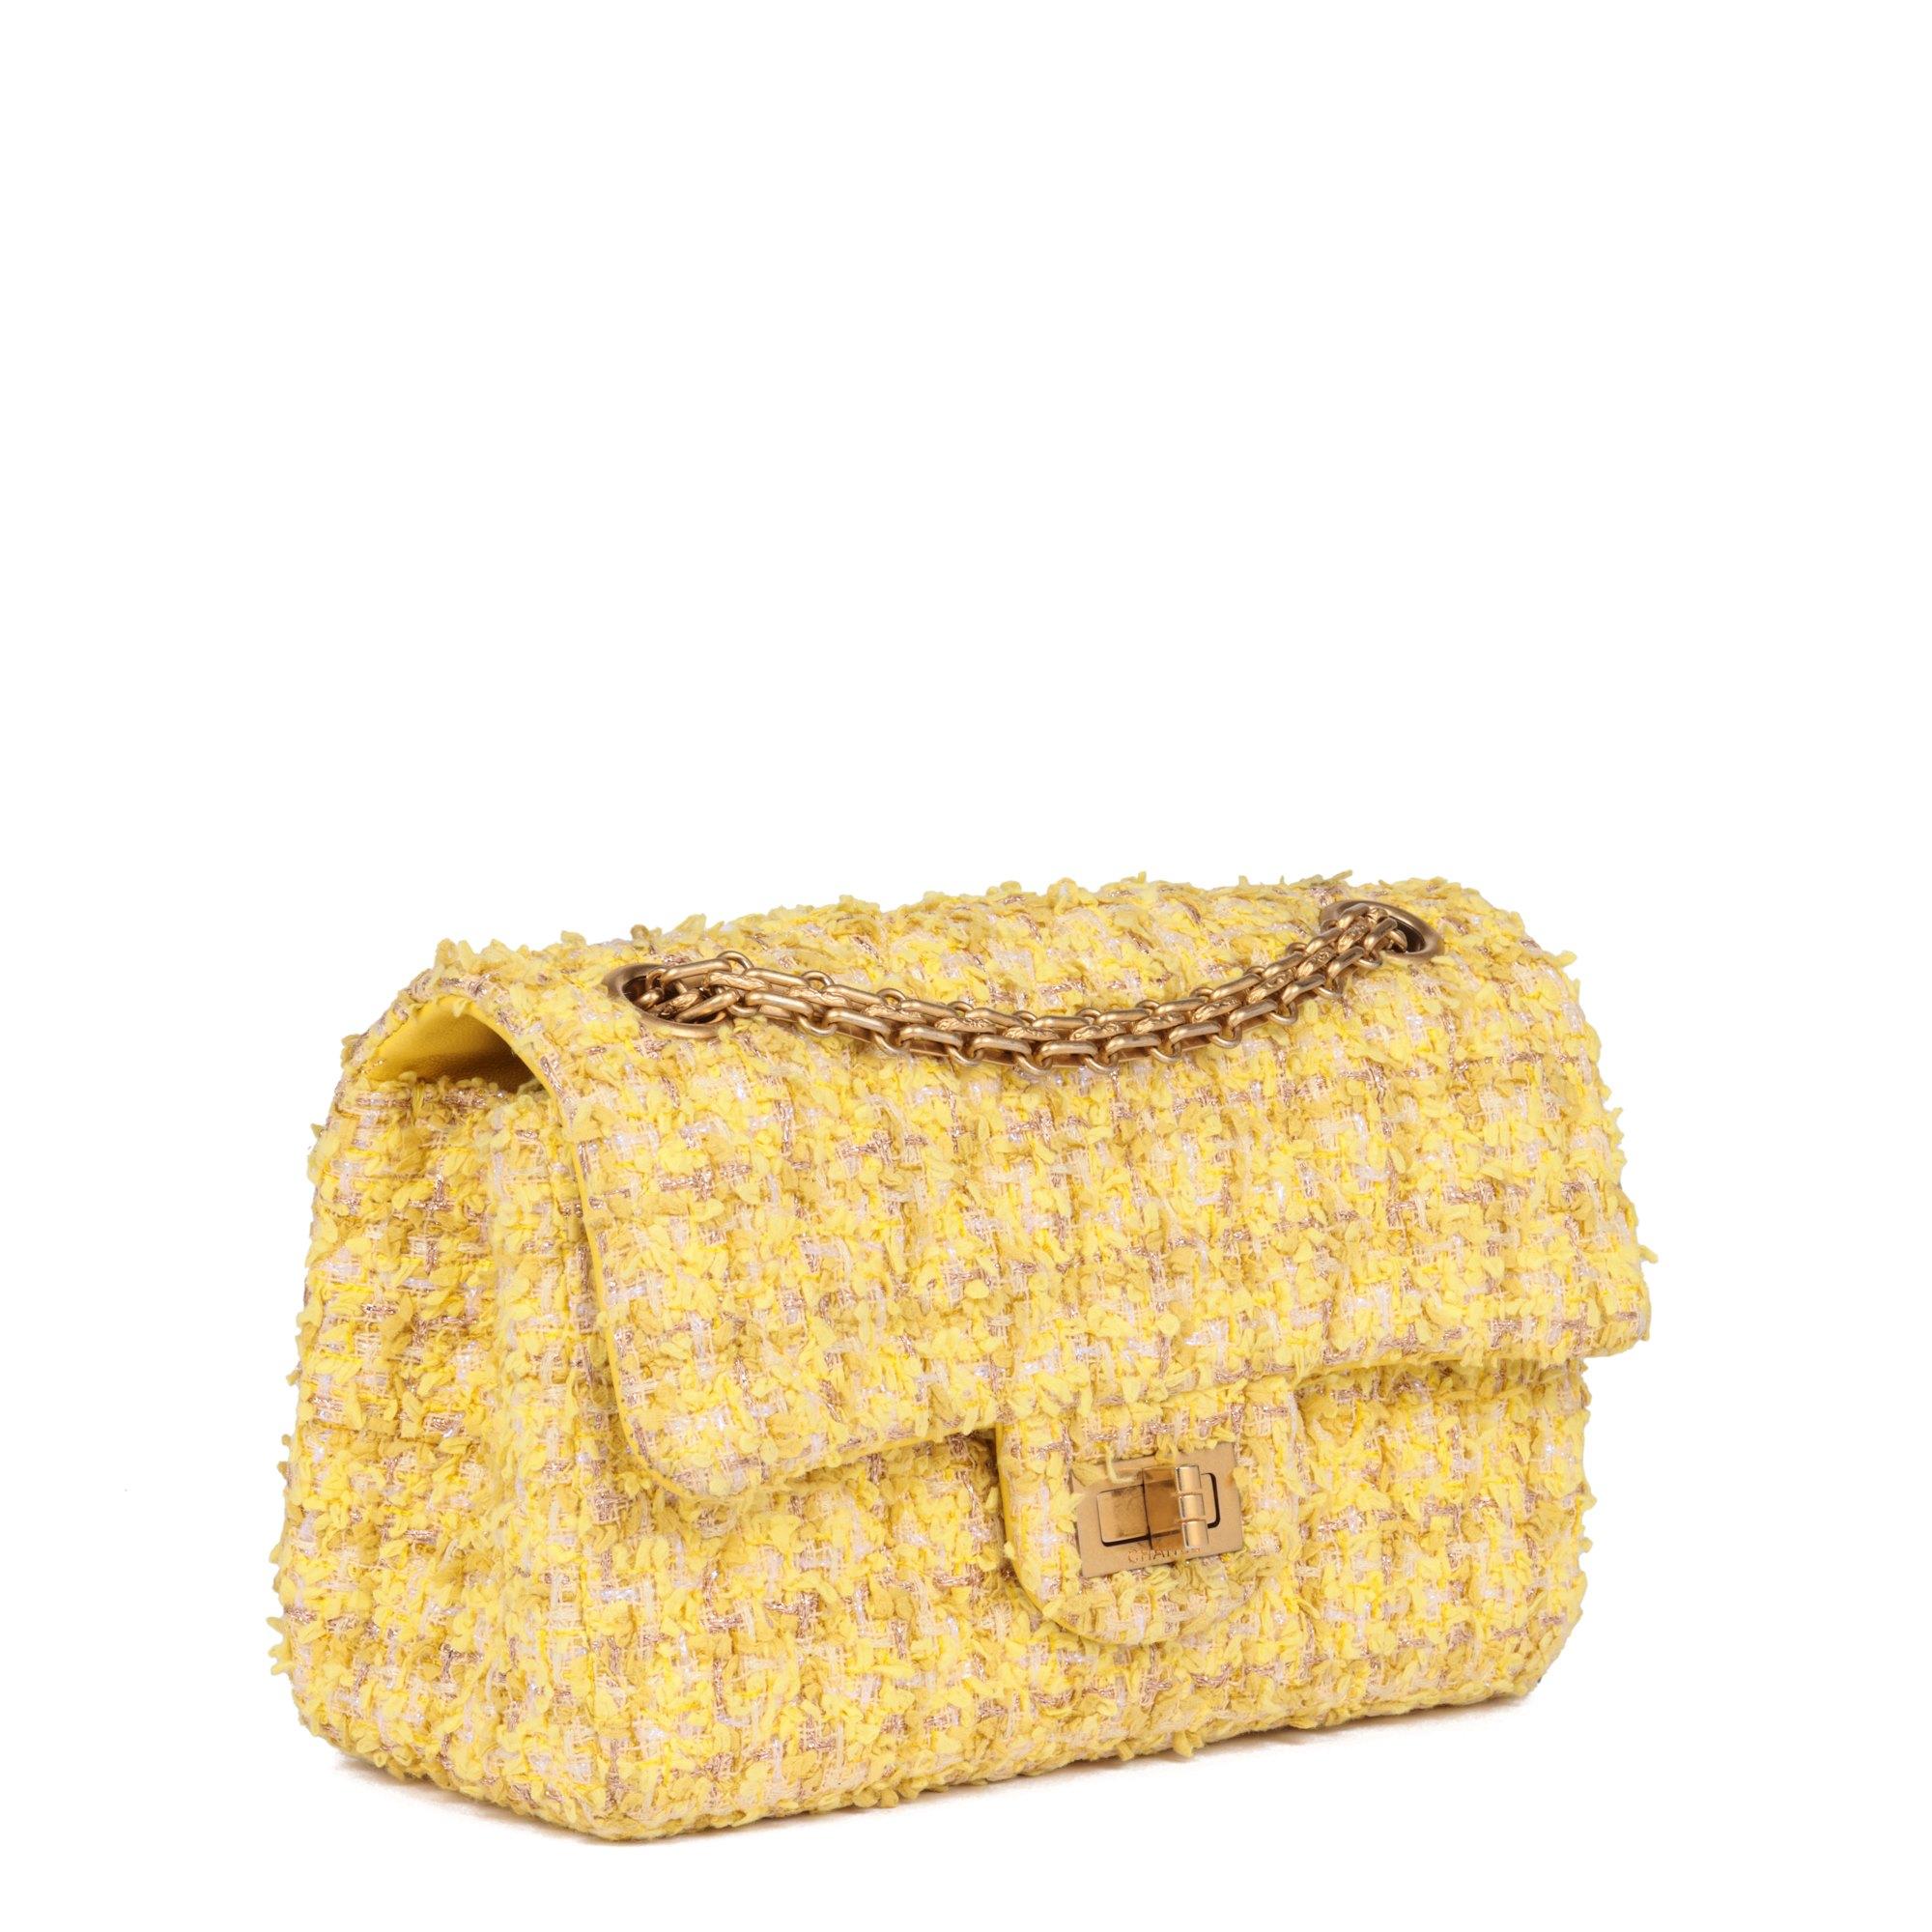 CHANEL
Canary Yellow Tweed Fabric 224 2.55 Reissue Double Flap Bag

Xupes Reference: HB5116
Serial Number: 29608066
Age (Circa): 2019
Accompanied By: Chanel Dust Bag, Authenticity Card
Authenticity Details: Authenticity Card, Serial Sticker (Made in